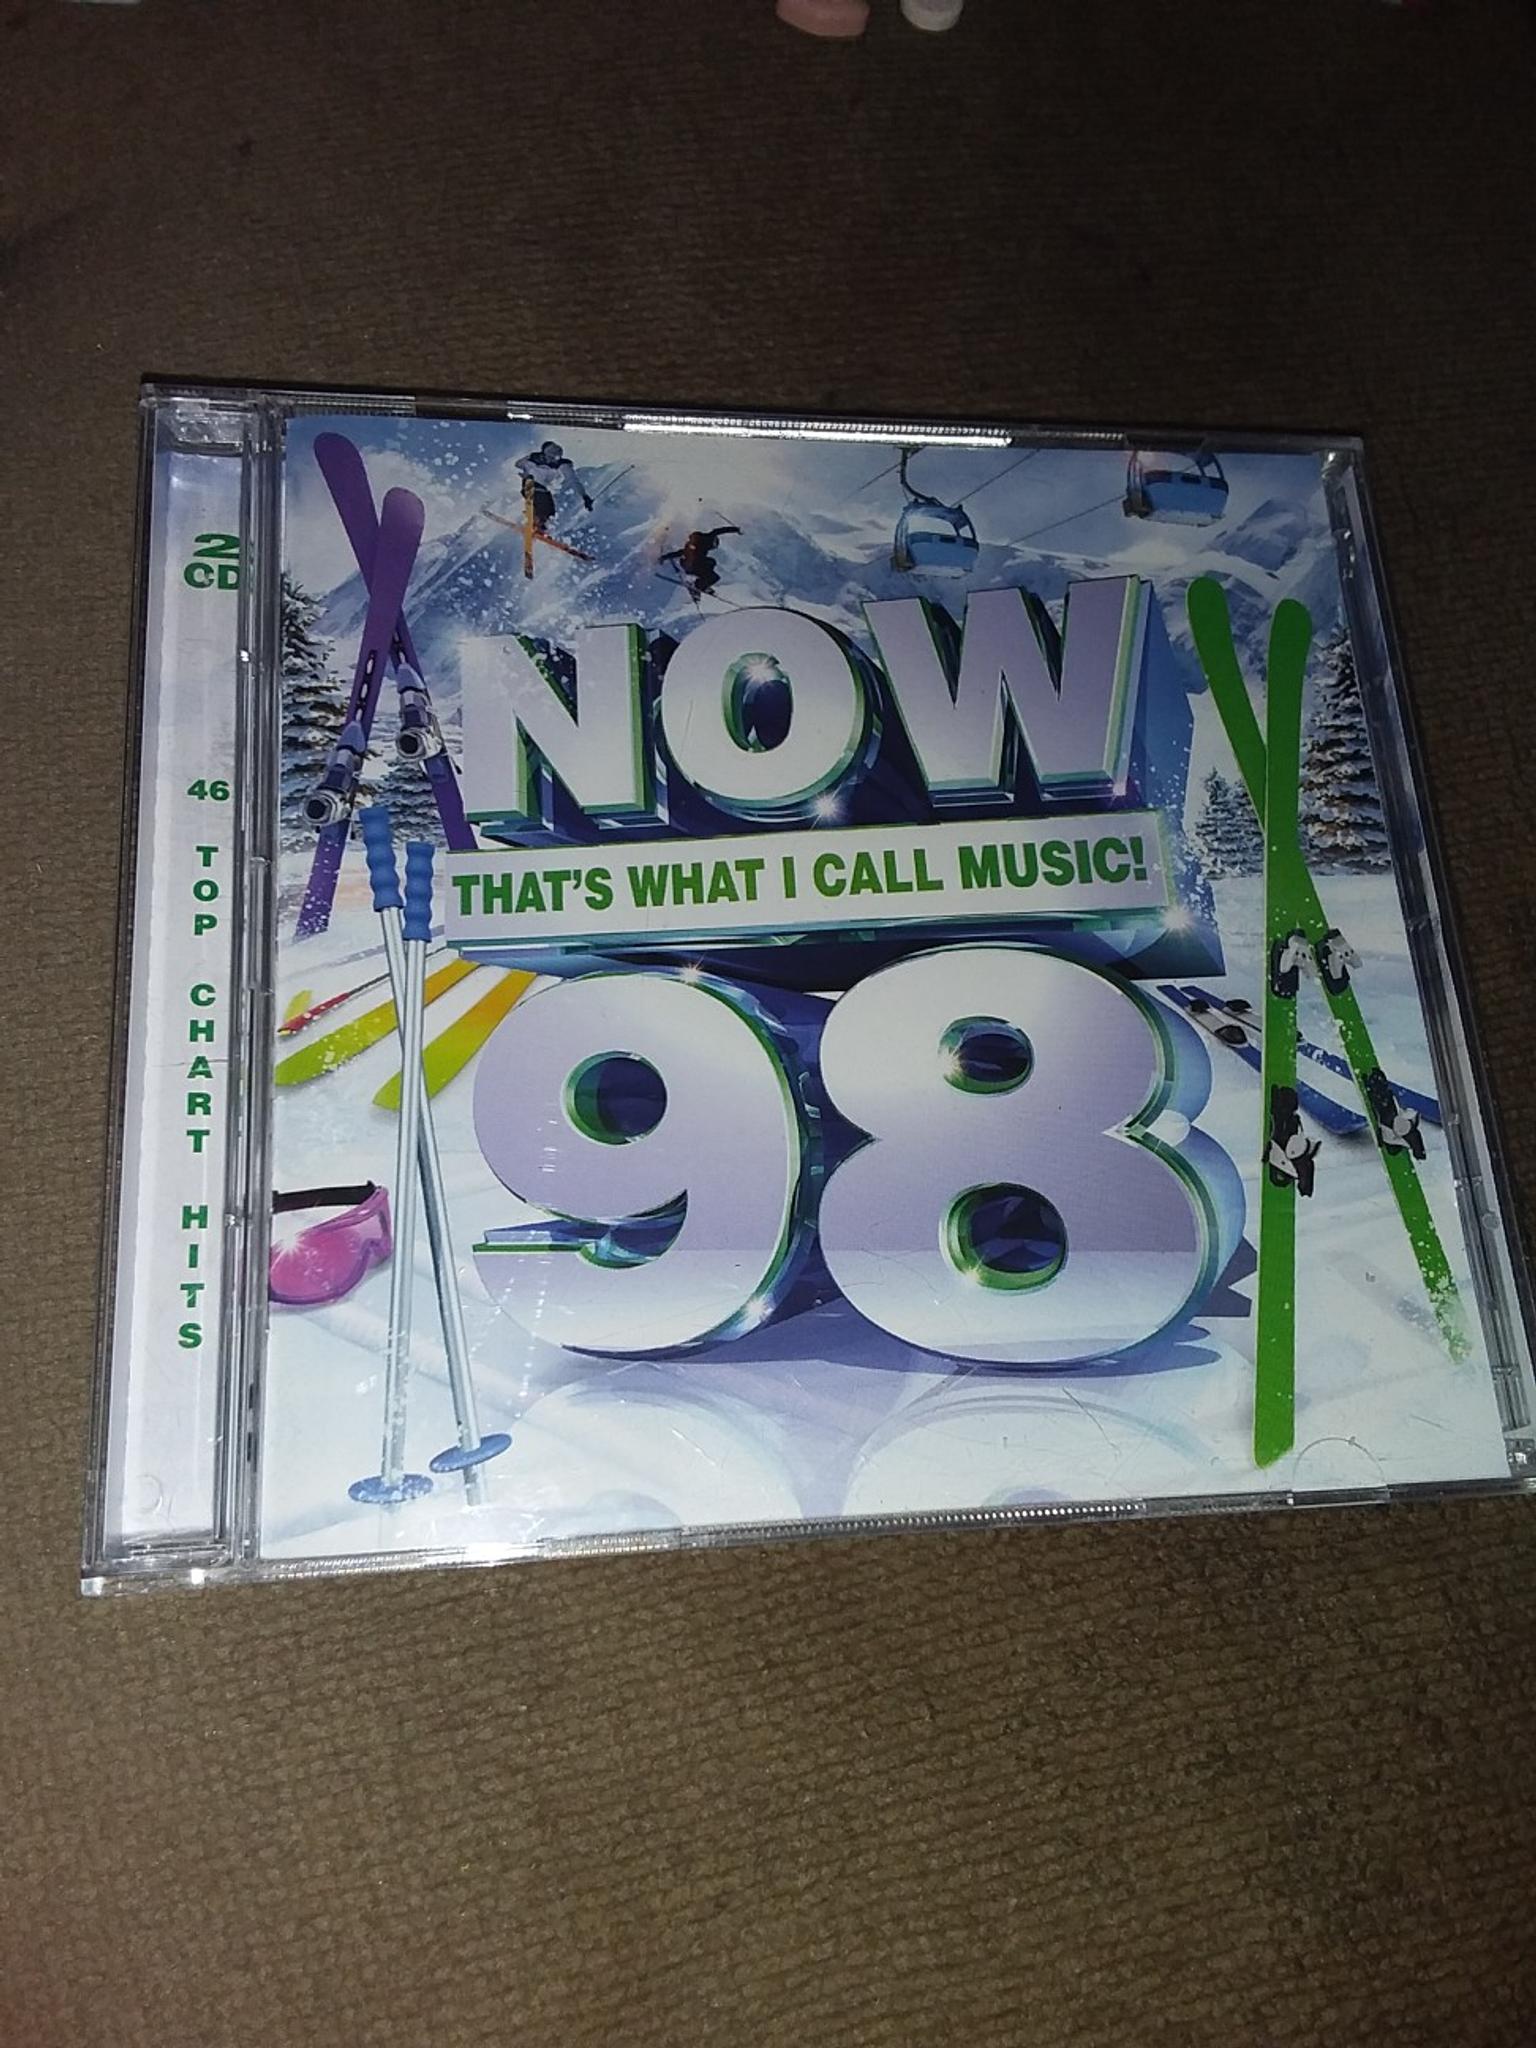 Now 98 2 Disc Cd Album For Sale In Sa5 Swansea For 1 50 For Sale Shpock